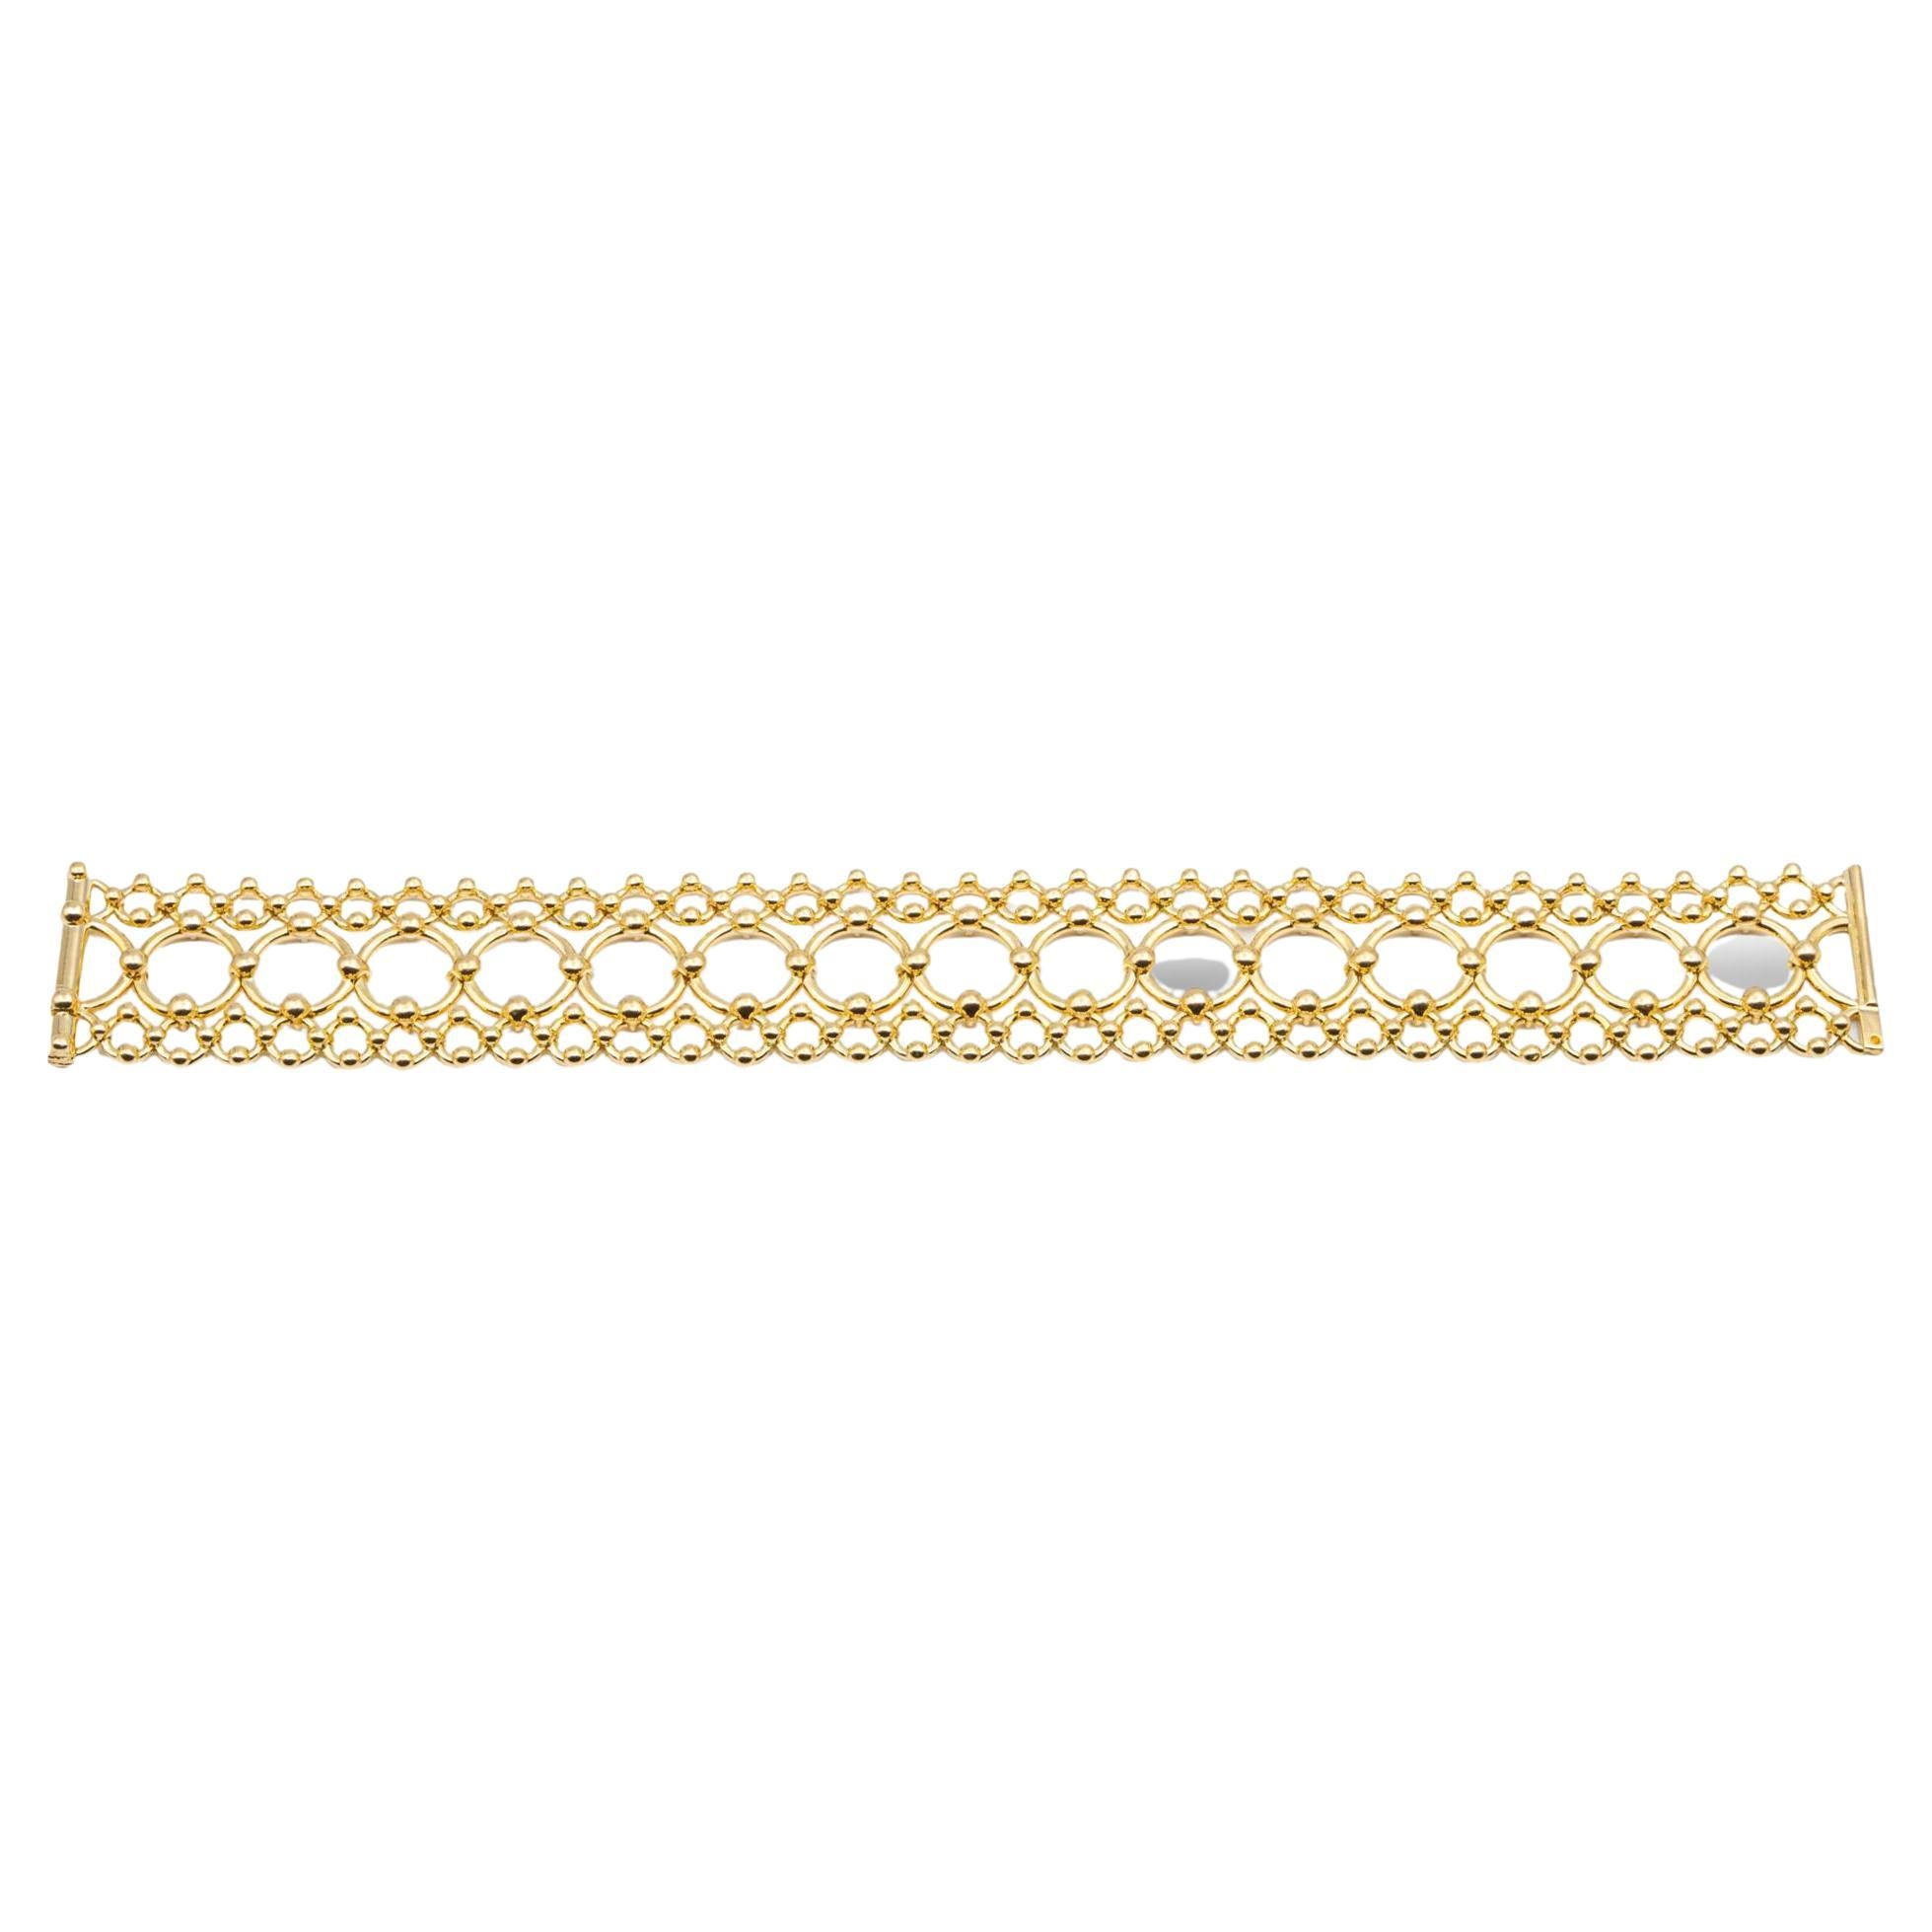 Vintage Tiffany & Co. Open-Scroll Round link design design Cleopatra bracelet finely crafted in 18 Karat yellow gold with Slide lock clasp. Bracelet is flexible, sits flat on the wrist and measures one inch wide. Fully hallmarked with logo and metal